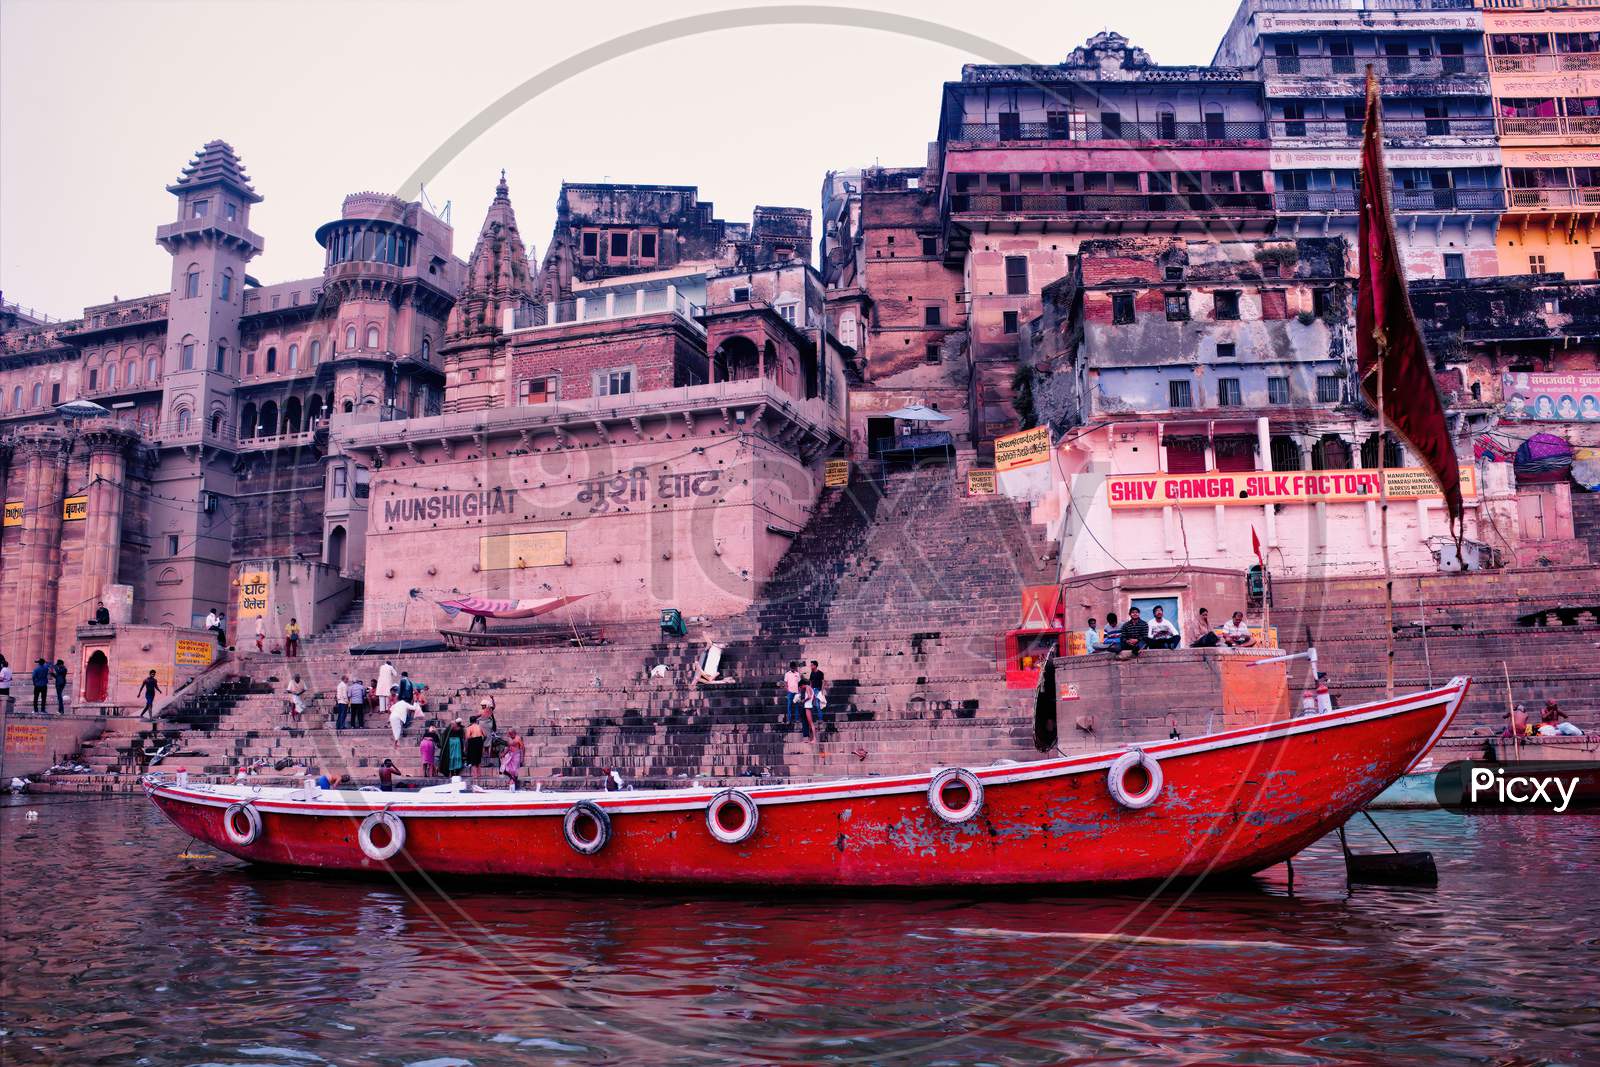 Varanasi, India - March 16, 2019: A Wooden Boats At River Ganga Docked Against Old Architecture Of Mushi Ghat In The Holy City Located In The State Of Uttar Pradesh.